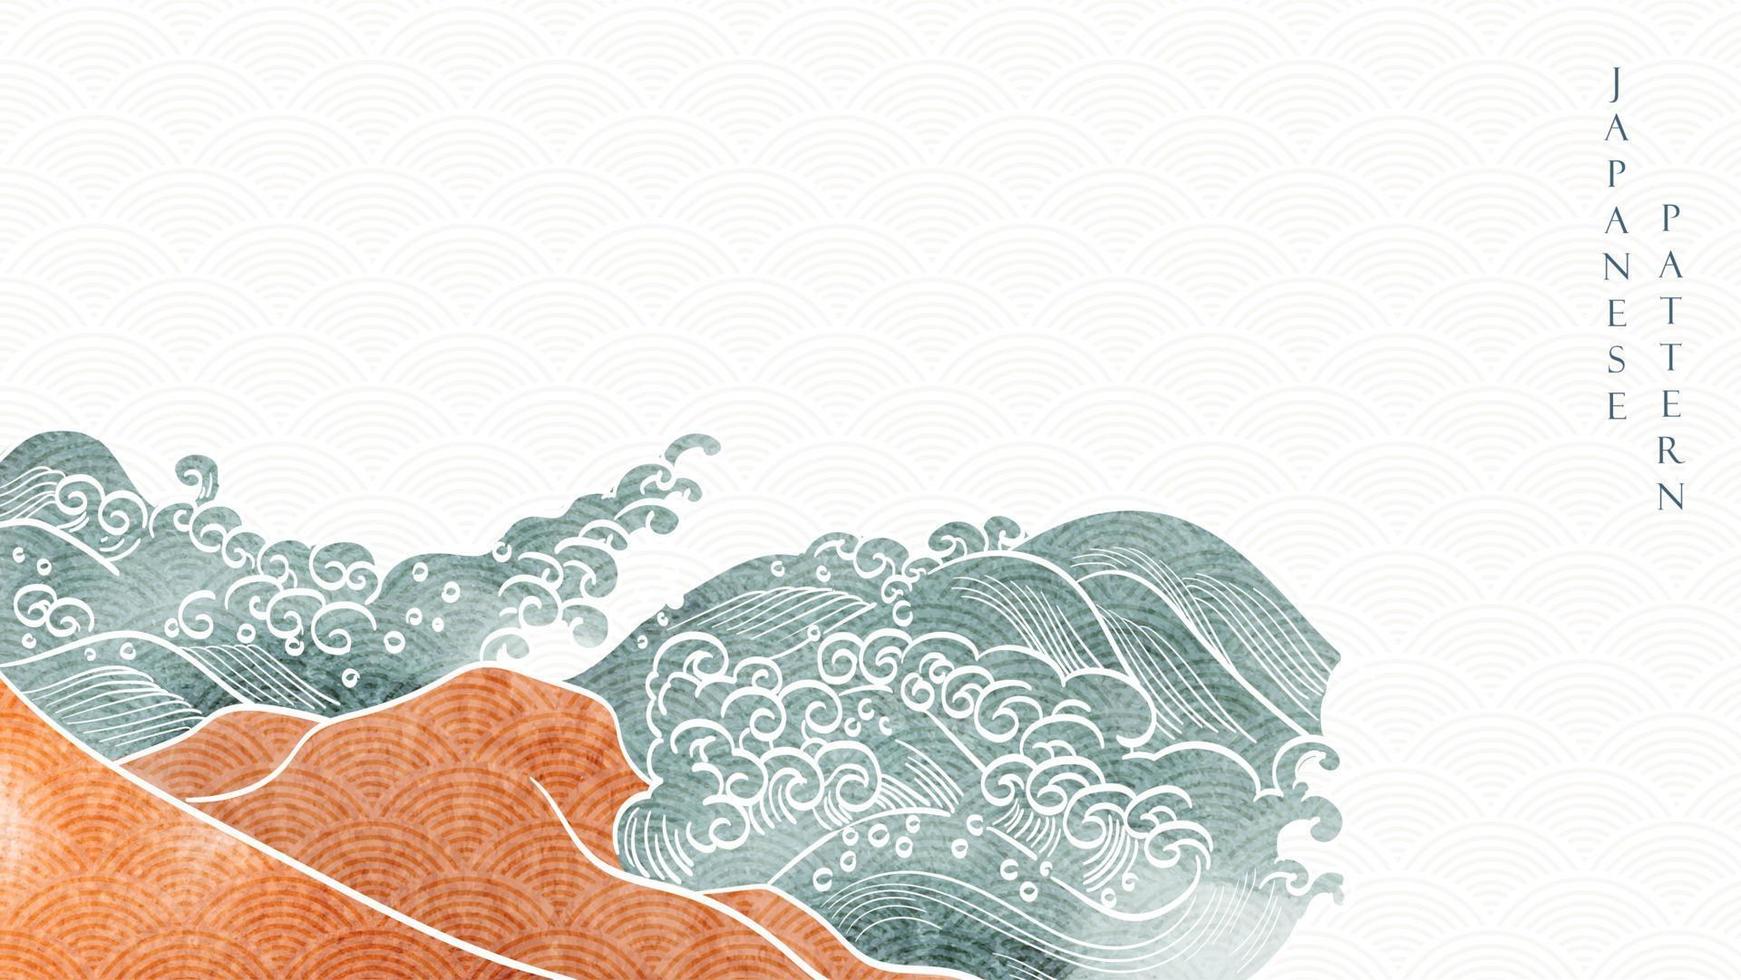 Japanese background with hand drawn wave pattern vector. Ocean sea banner design with natural landscape template in vintage style. vector